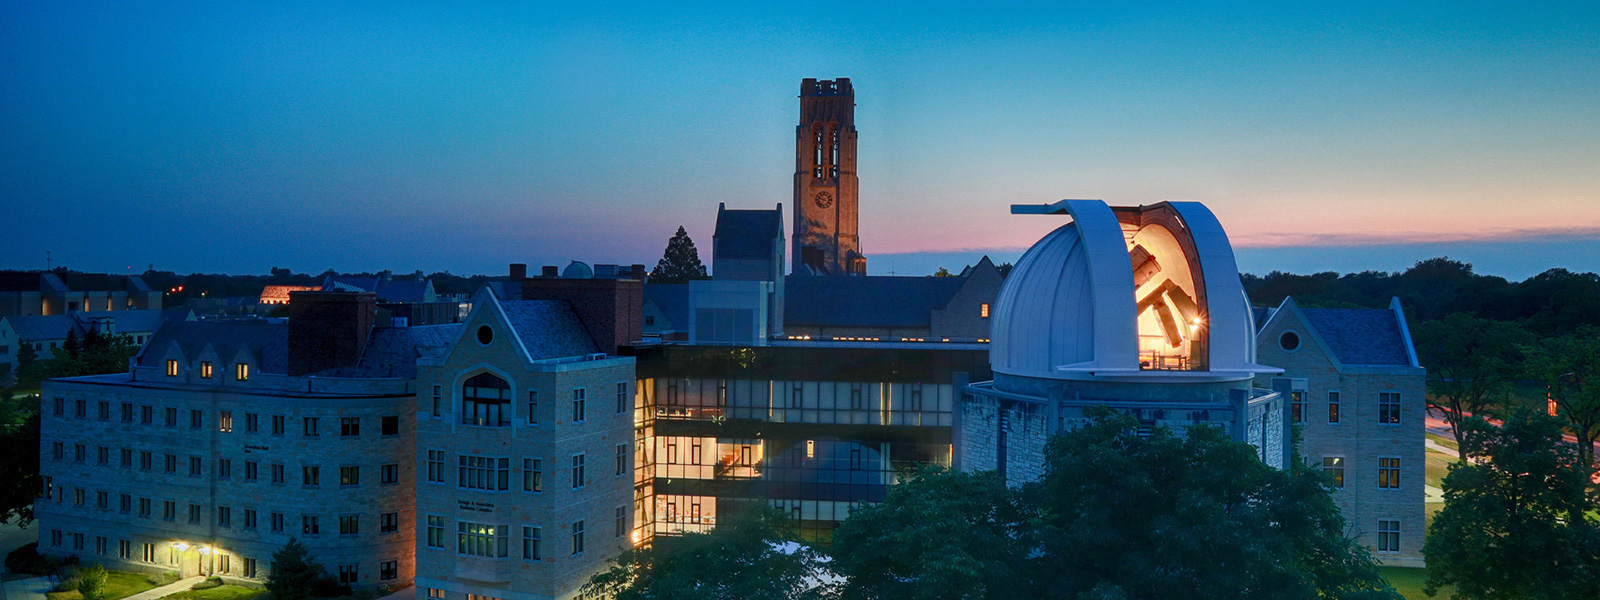 Main Campus at dusk with the University Hall bell tower in the center